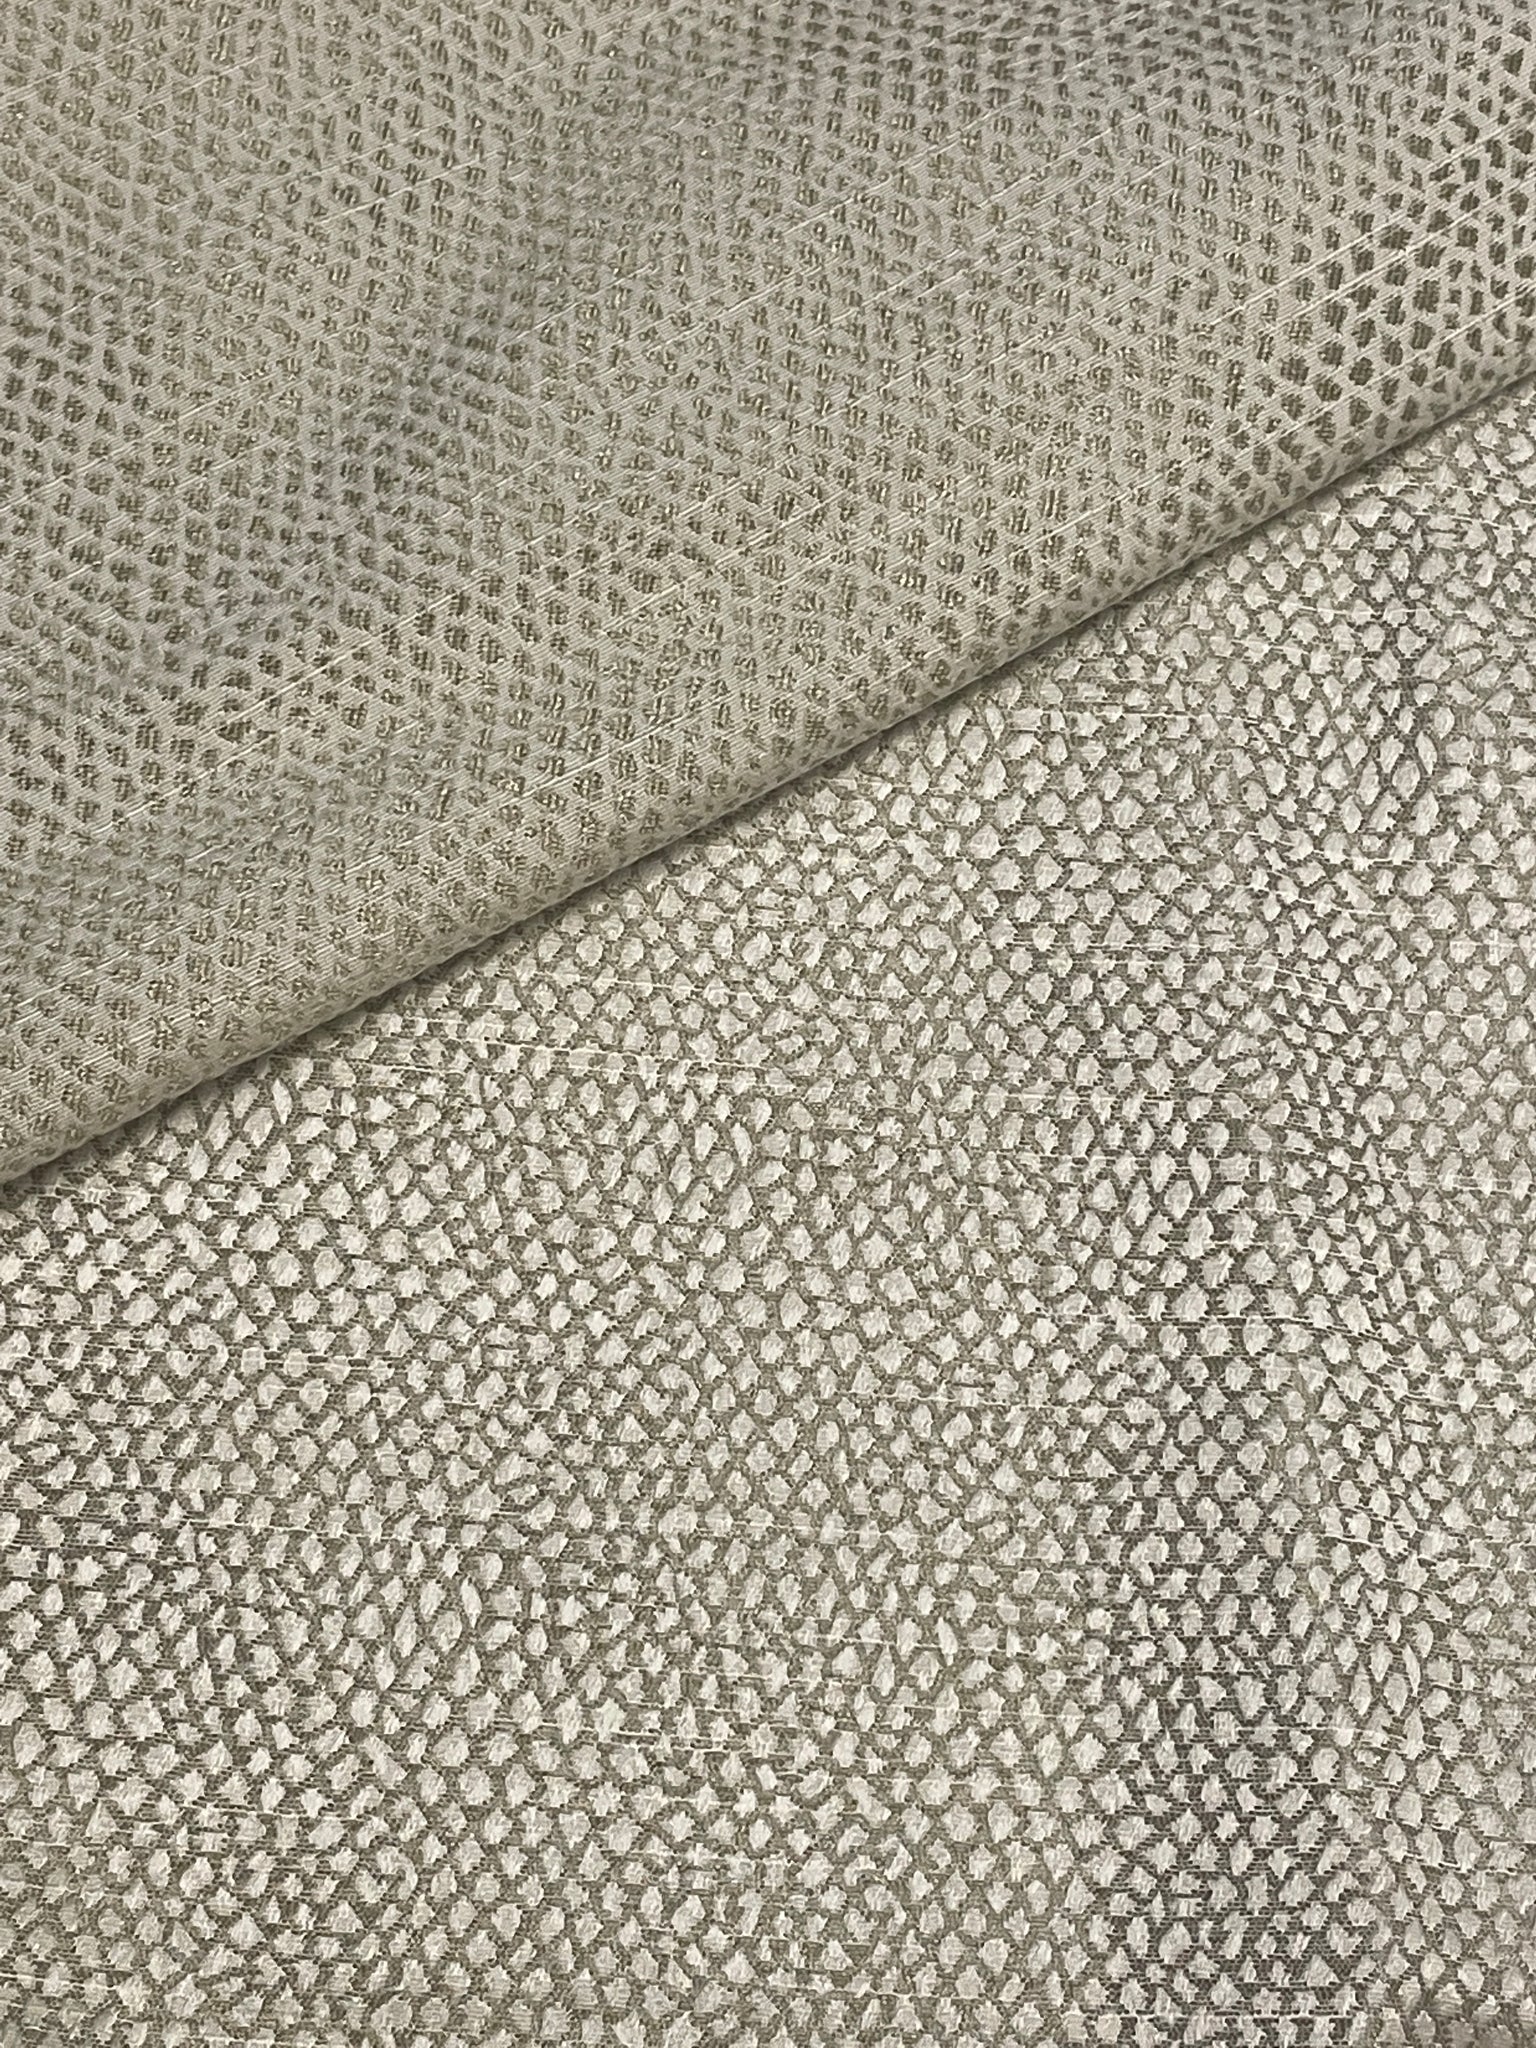 SALE 1 1/2 YD Polyester Blend Home Dec. - Off White and Gray Pebbles